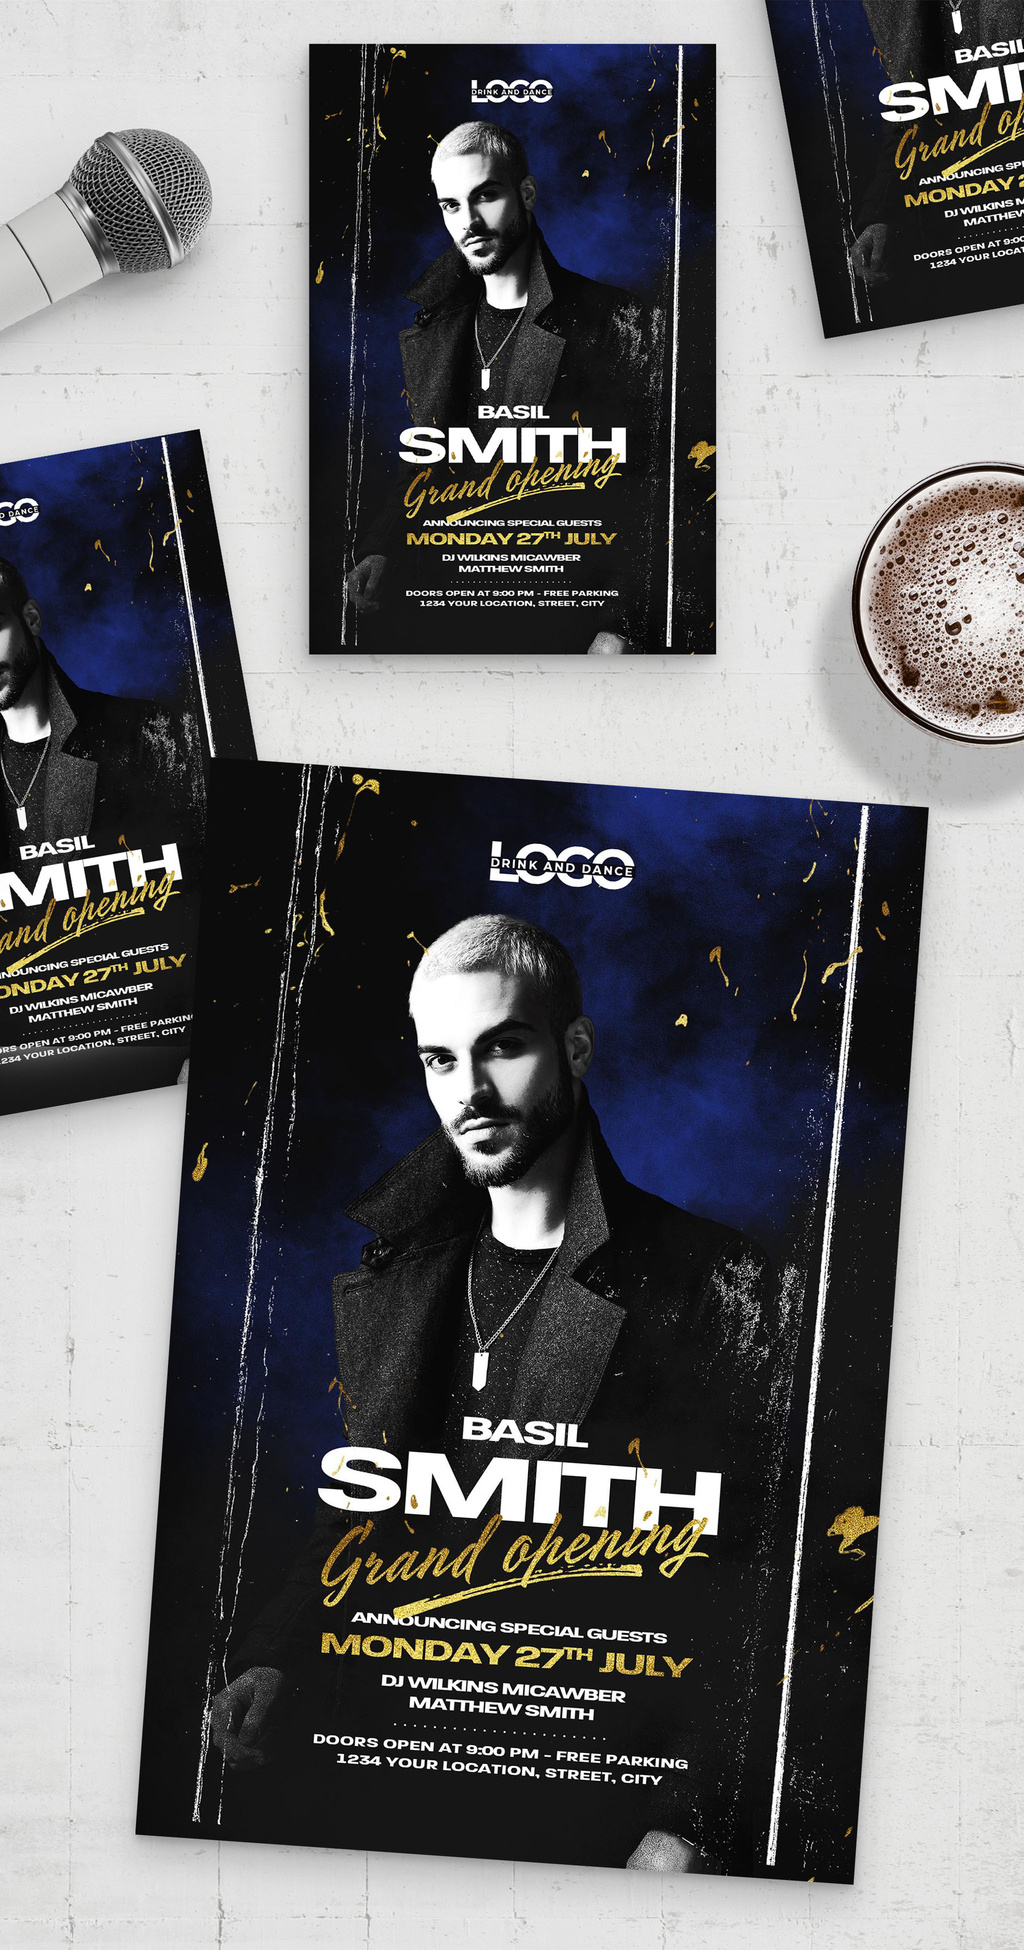 nightclub-flyer-poster-banner-with-performer-artist-image-psd-23